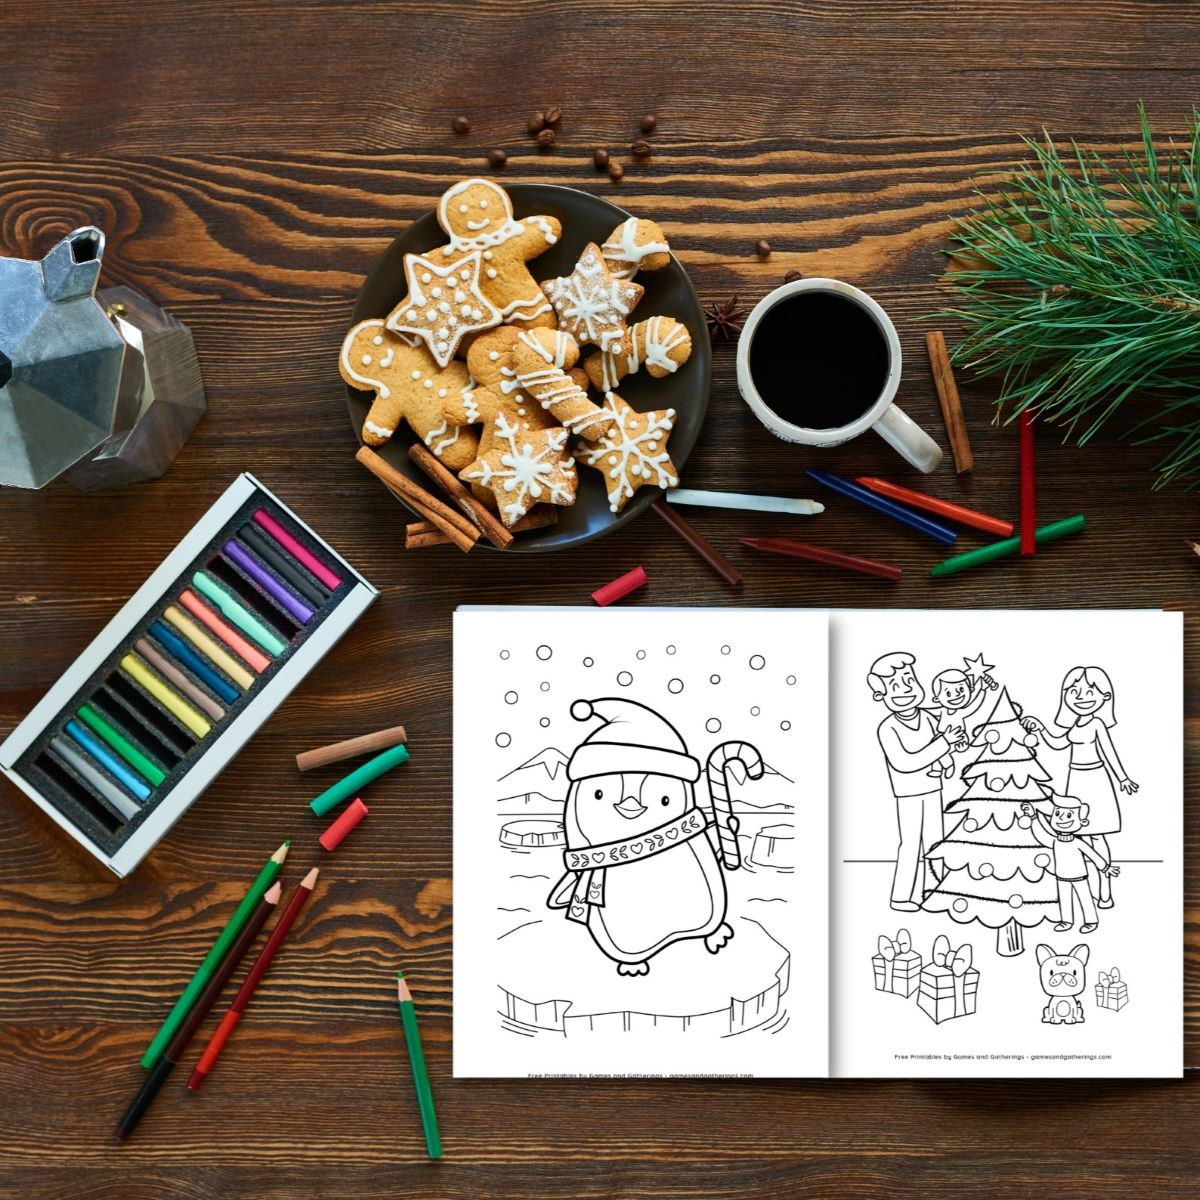 A wooden table with an open printable Christmas coloring book and some colored pencils, Christmas cookies and a mug of coffee.